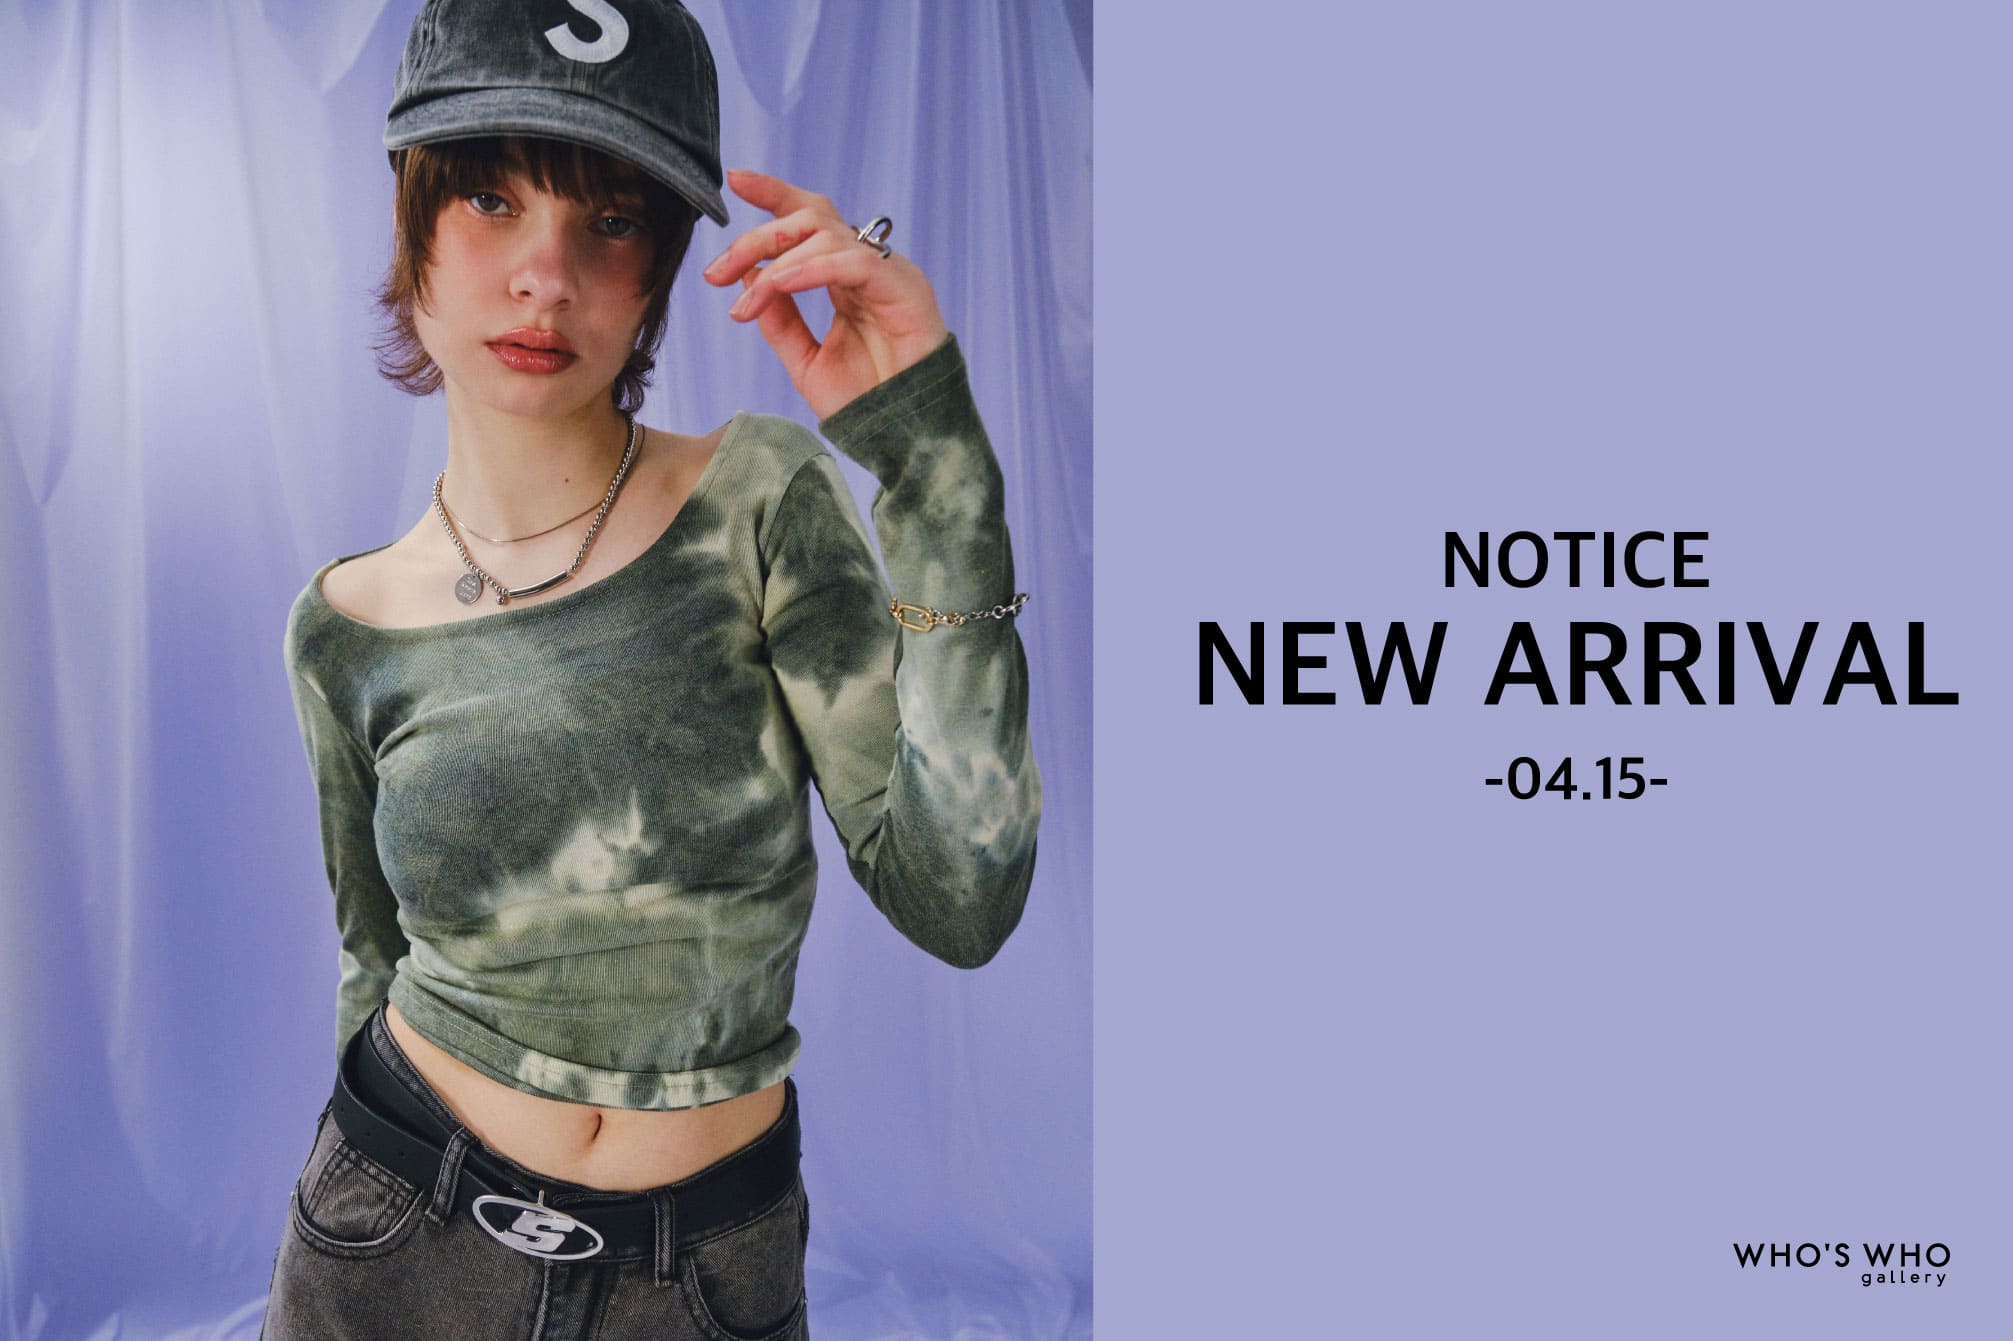 WHO’S WHO gallery 【NEW ARRIVAL NOTICE-04.15-】